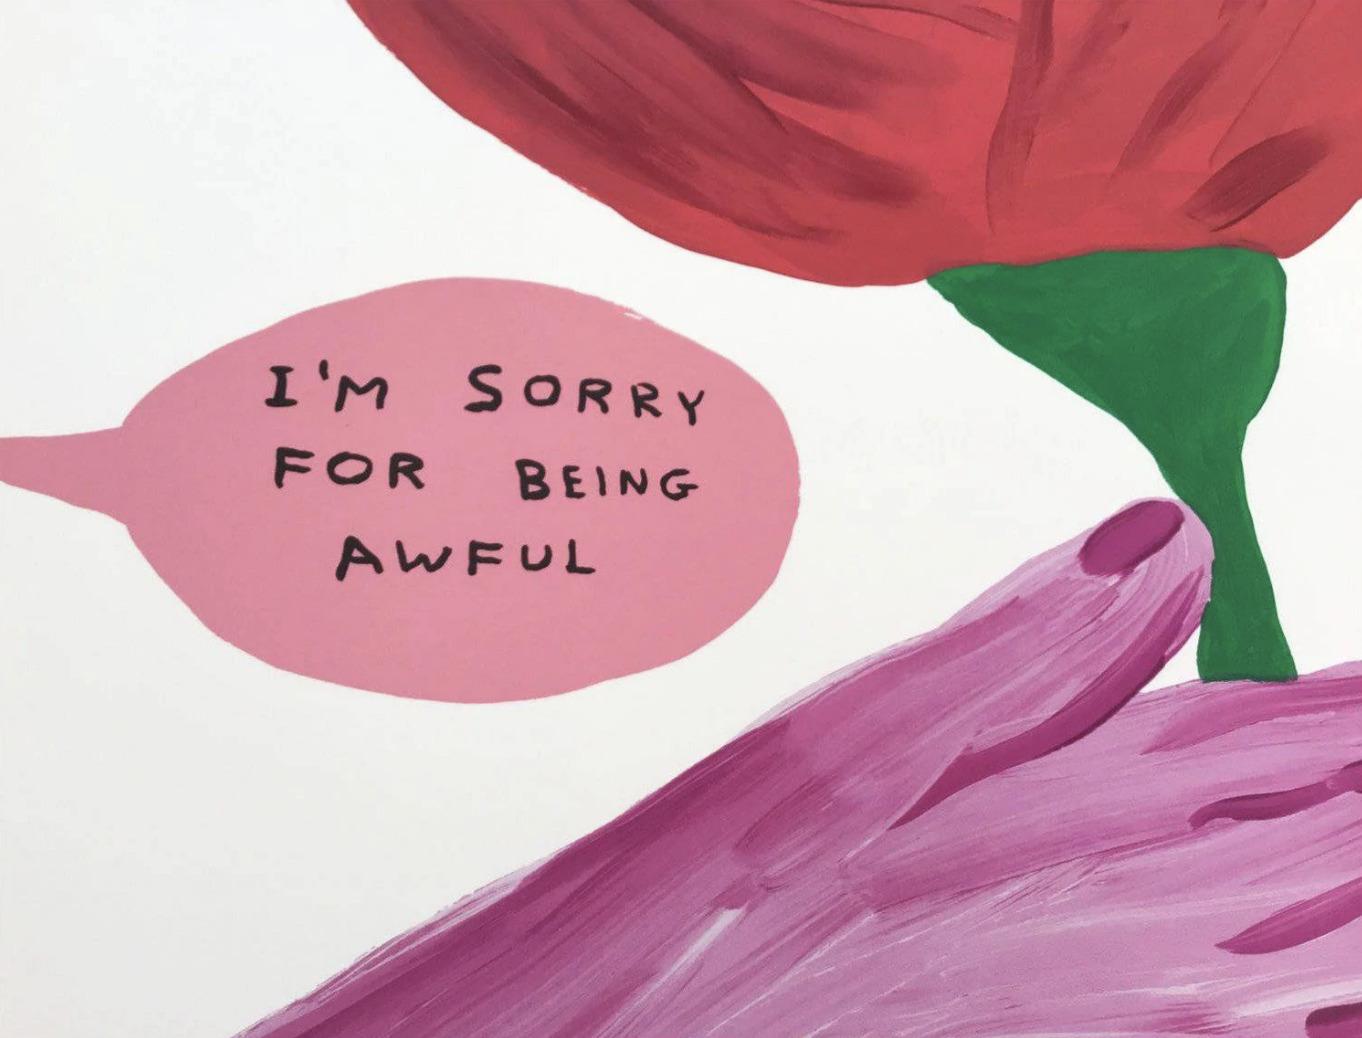 I'm Sorry for Being Awful - Print by David Shrigley